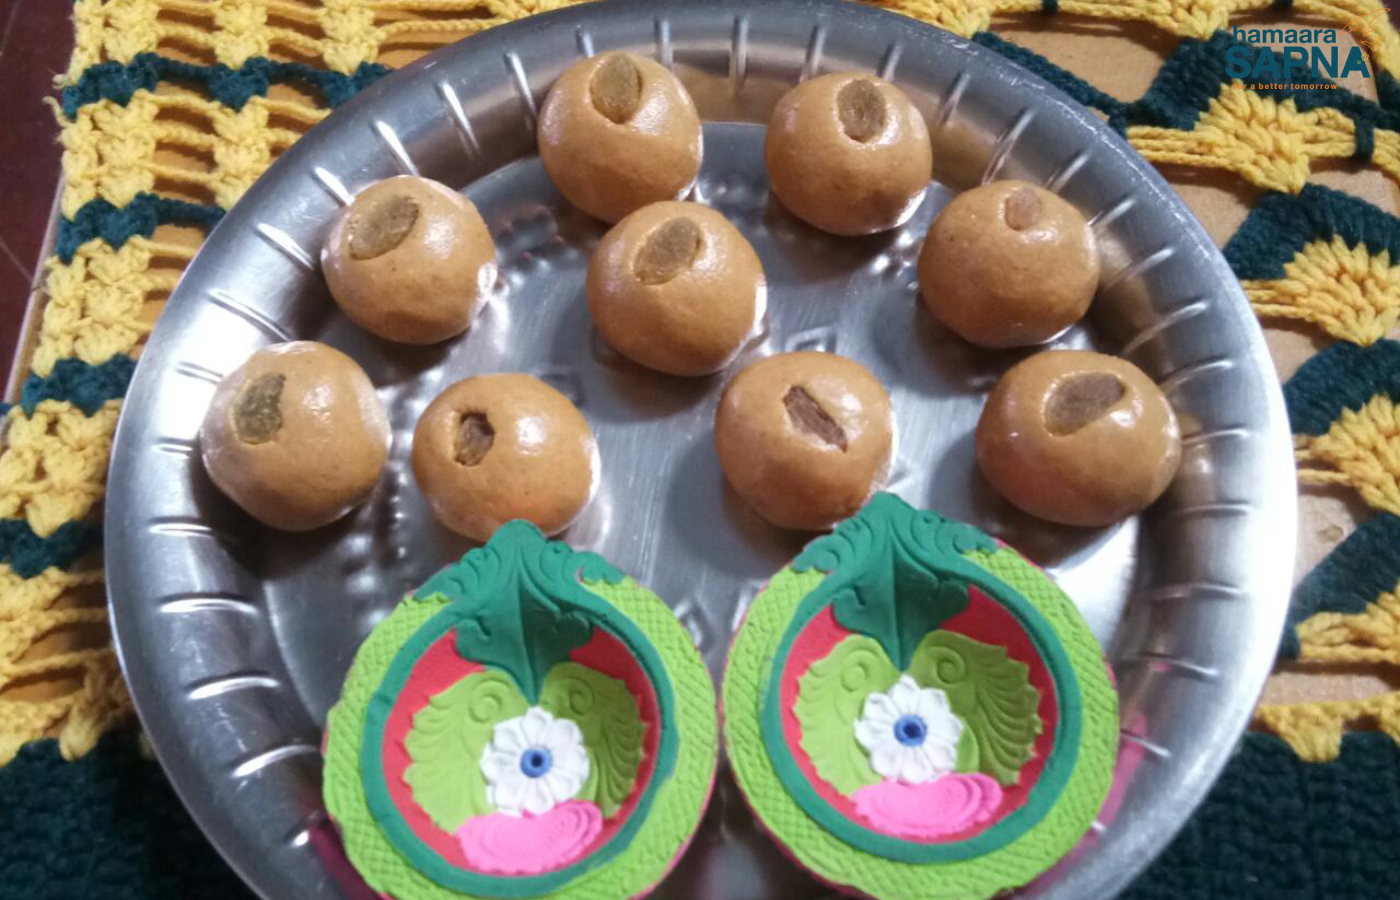 Lovely textured and coloured Mohan Thal balls - to sweeten Diwali.